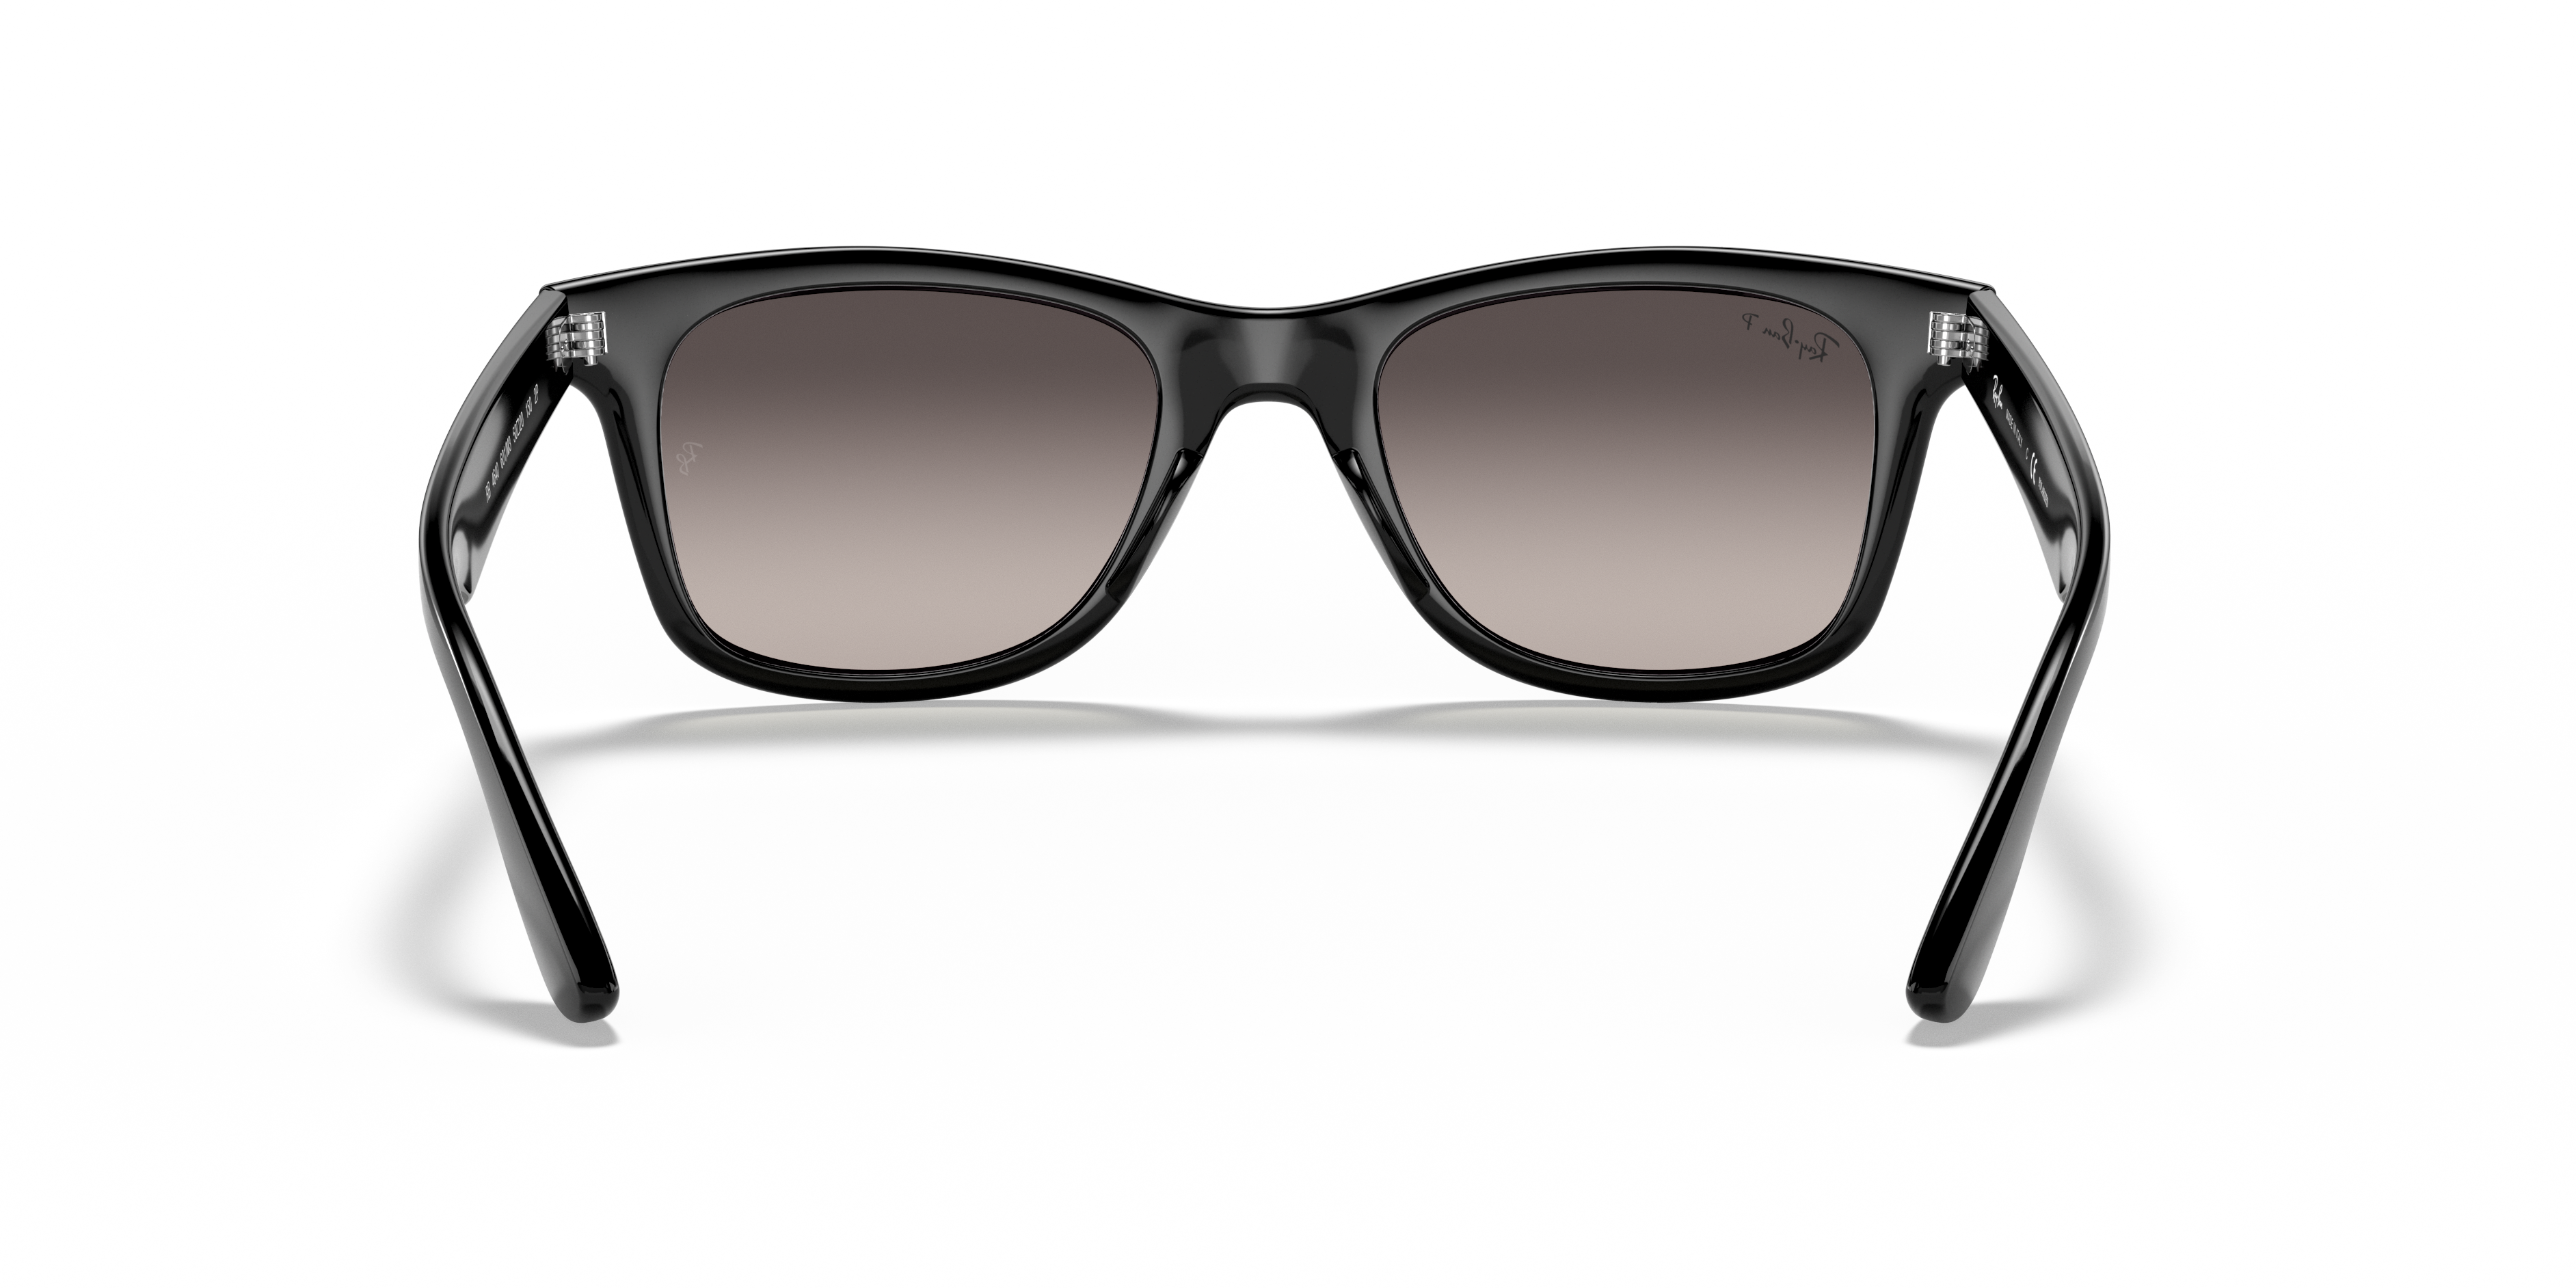 Rb4640 Sunglasses in Black and Grey | Ray-Ban®